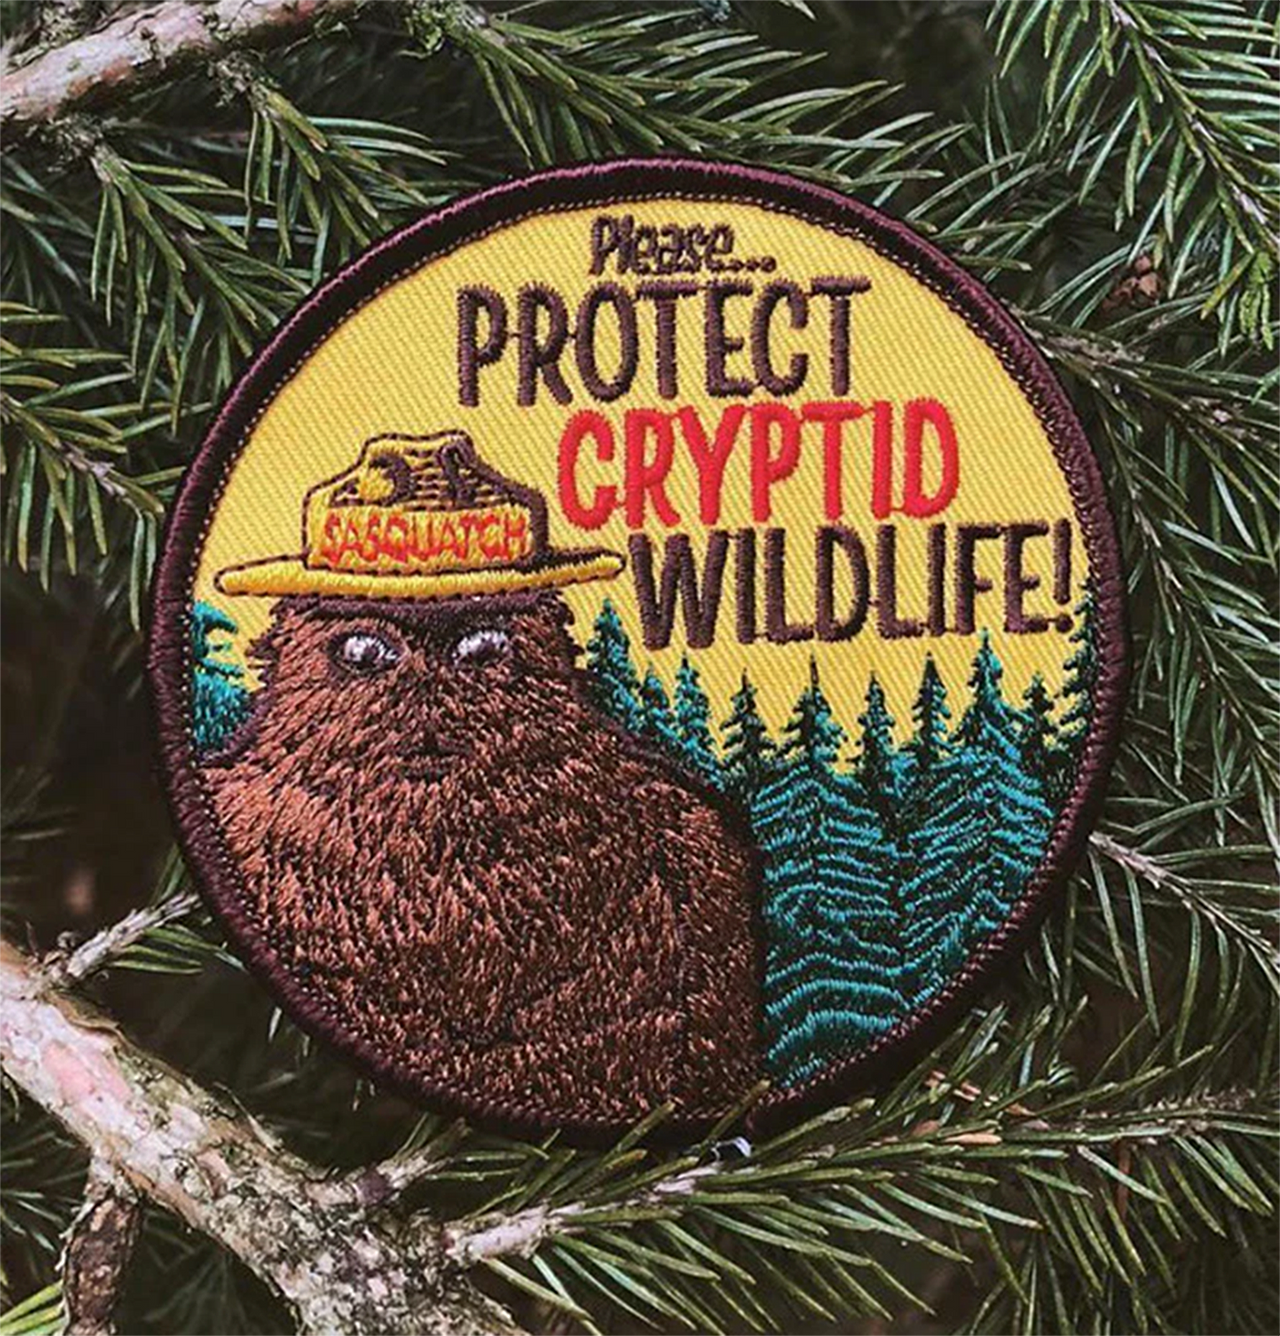 MAIDEN VOYAGE CRYPTID PSA PATCH